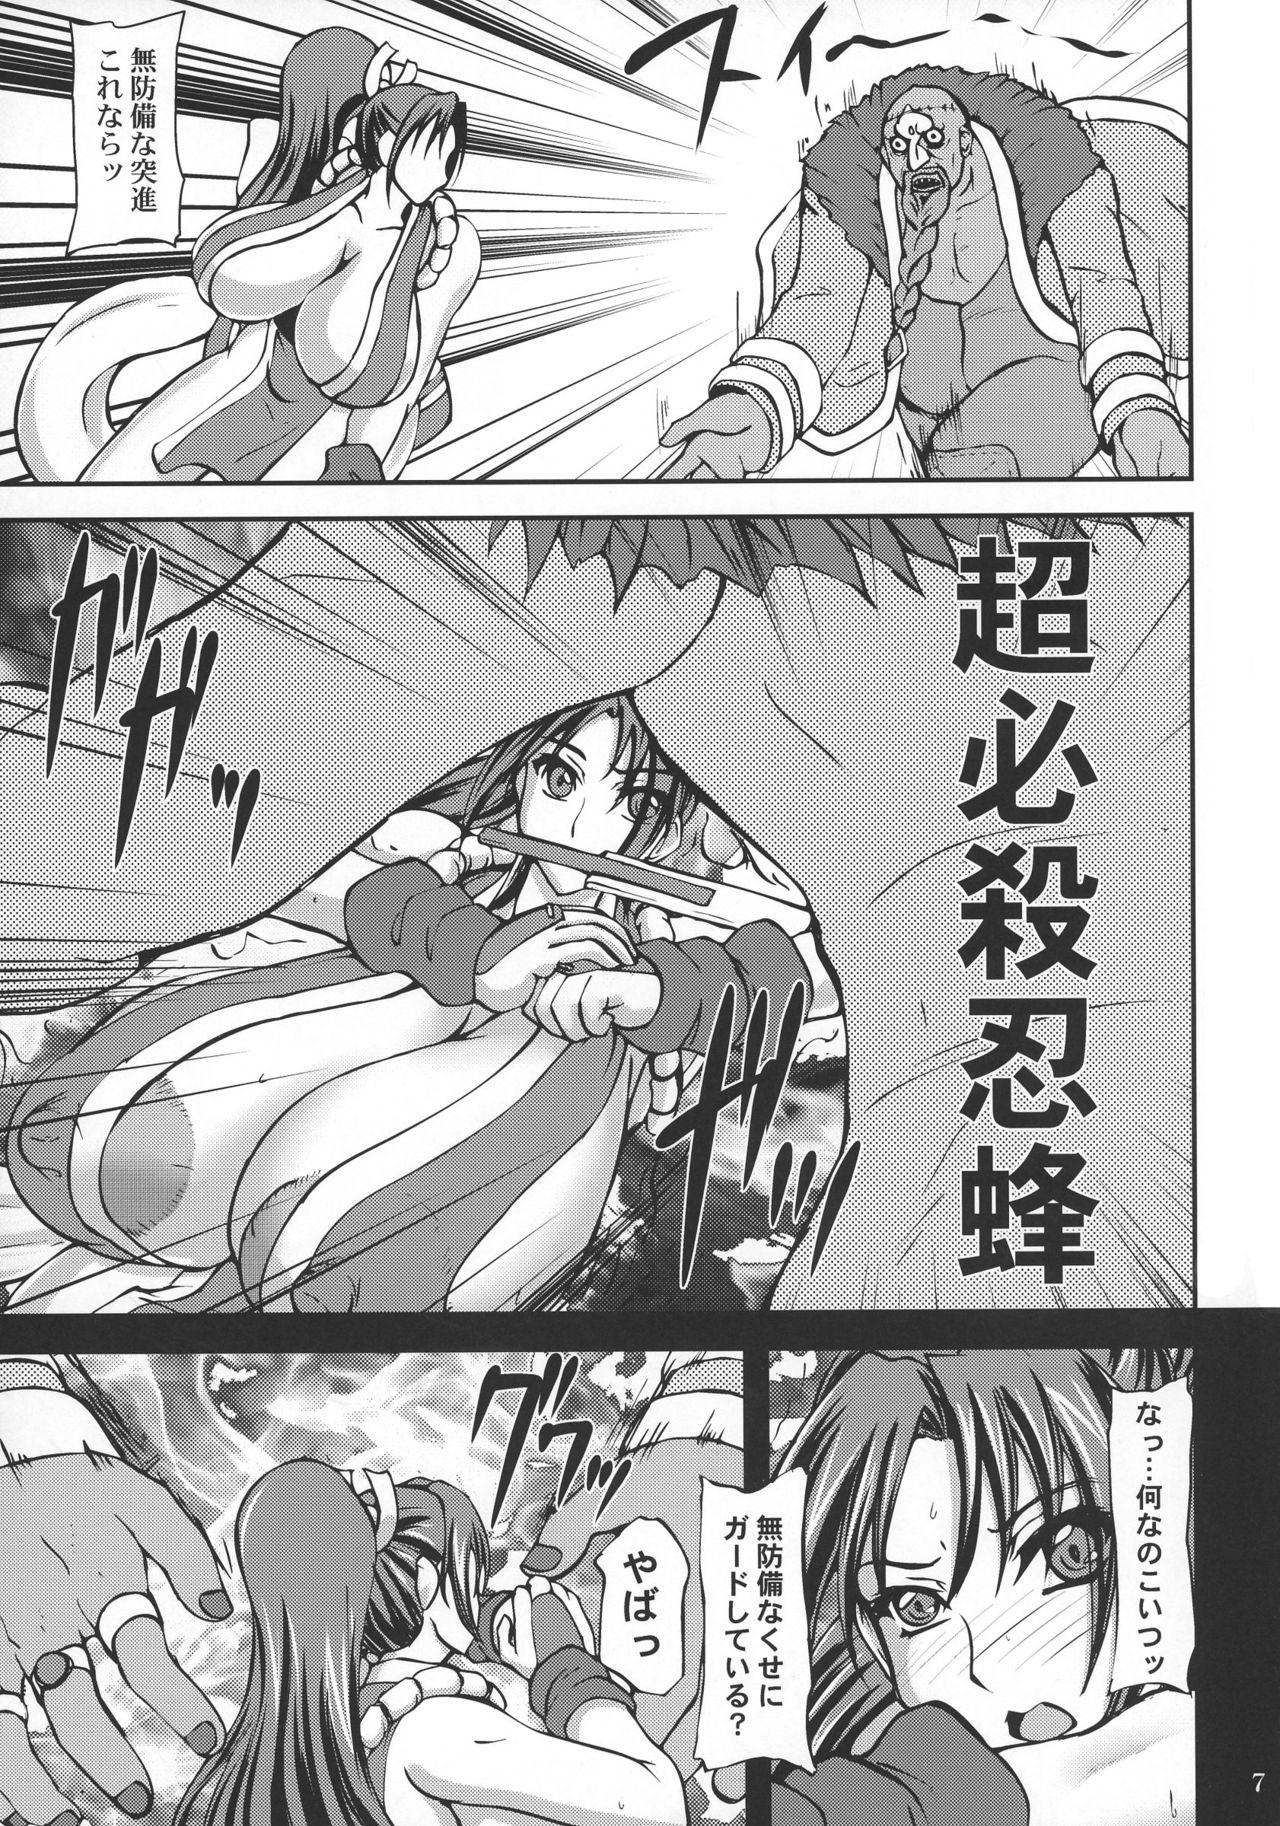 Bath 14 - King of fighters Girlongirl - Page 7